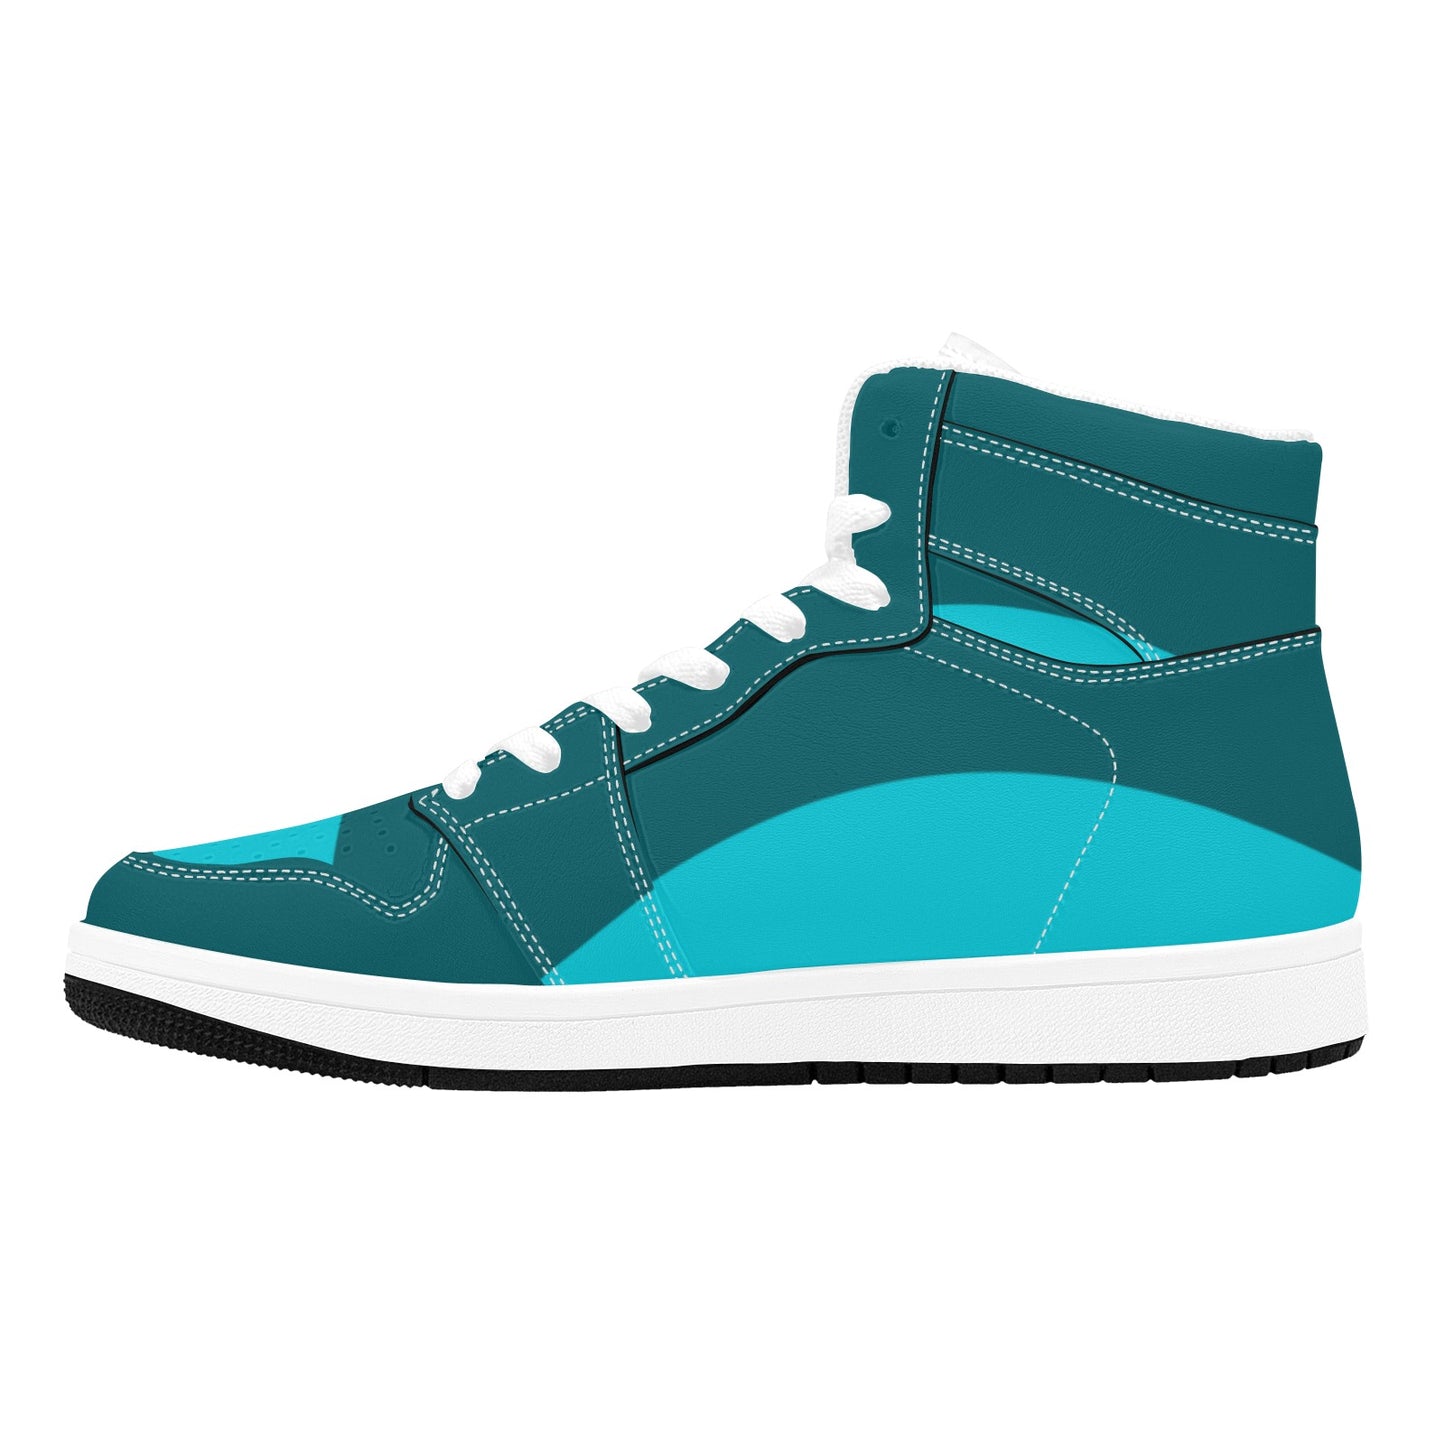 Blue High Top Sneakers Blue Turquoise High Top Sneakers Men's High Top Sneakers